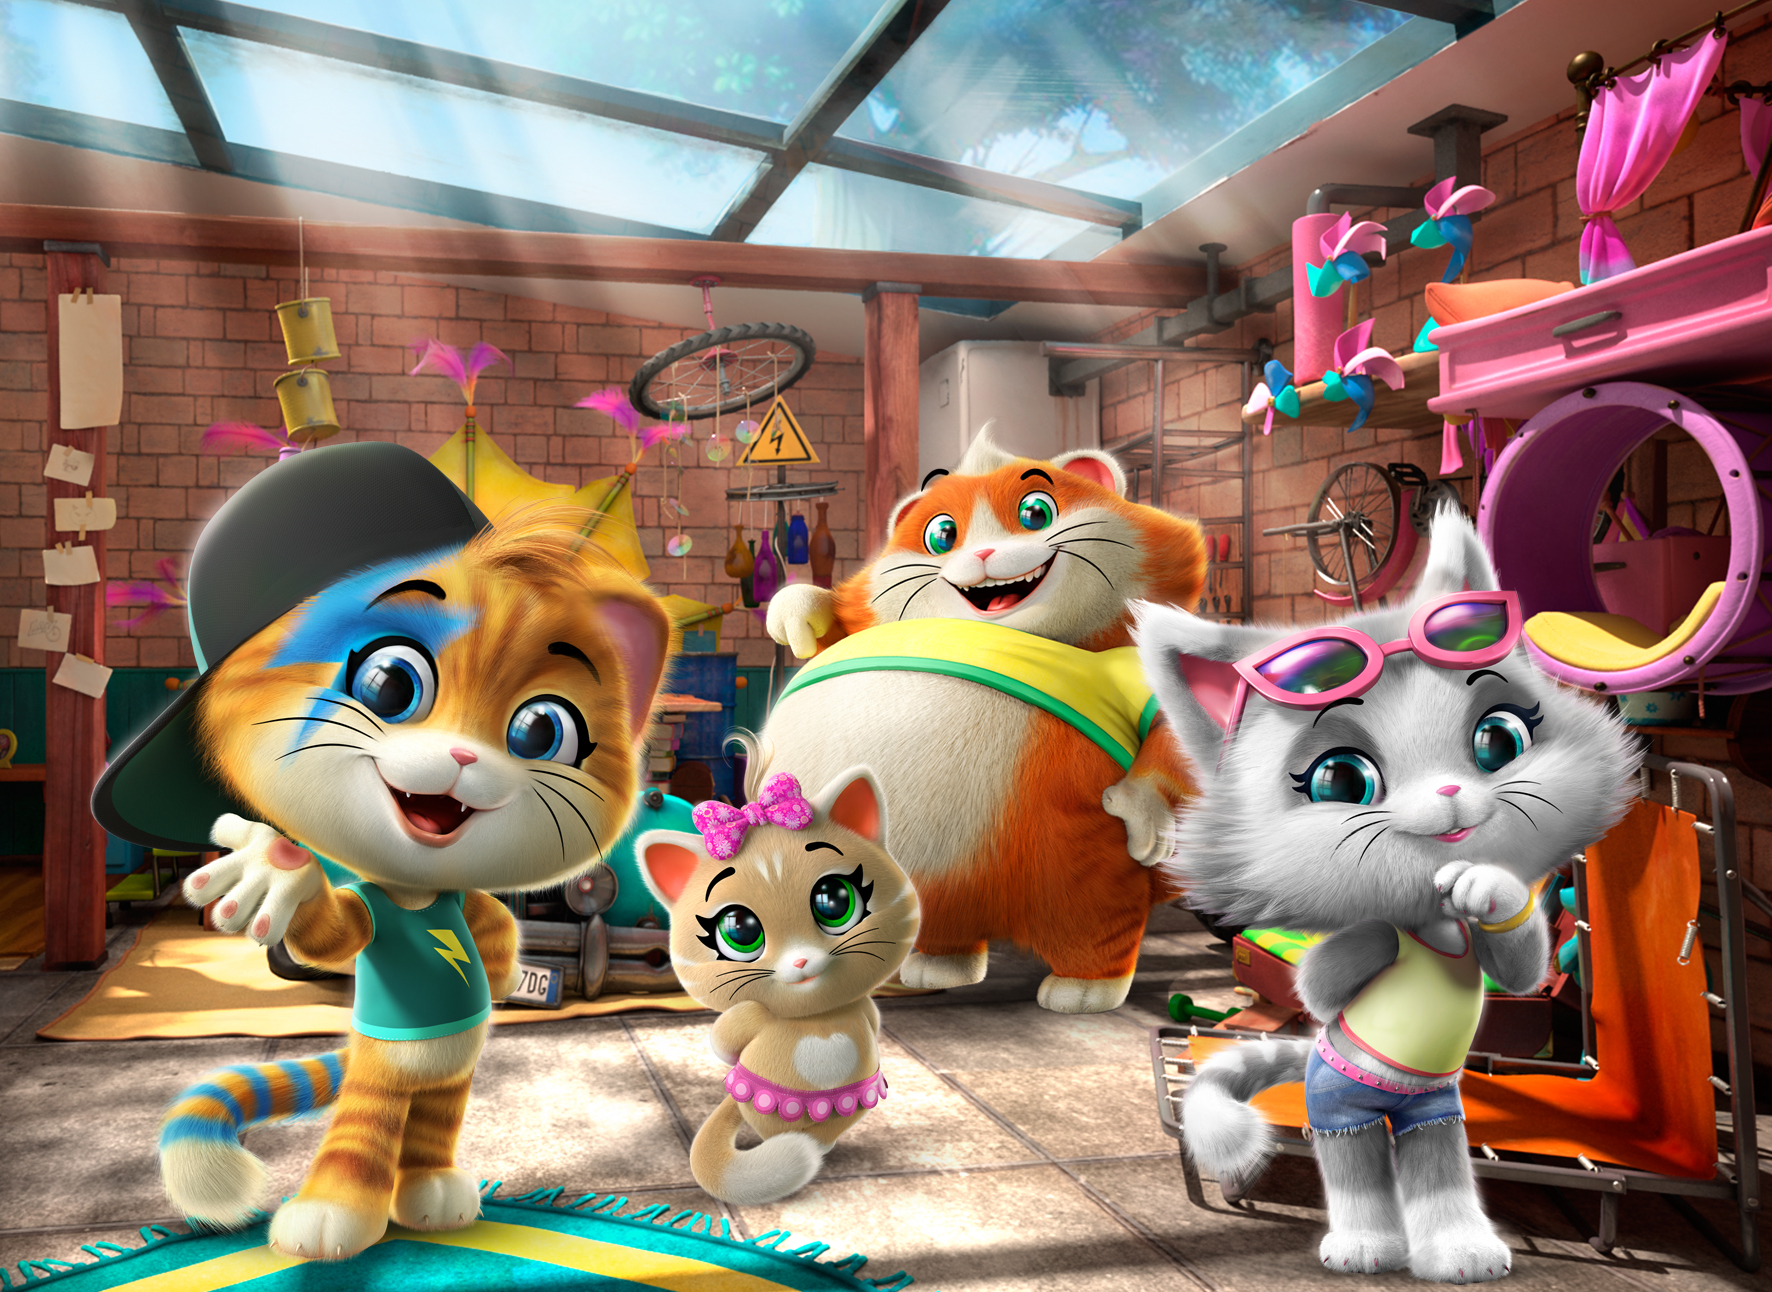 Rainbow’s 44 Cats To Premiere on Nickelodeon in the U.S